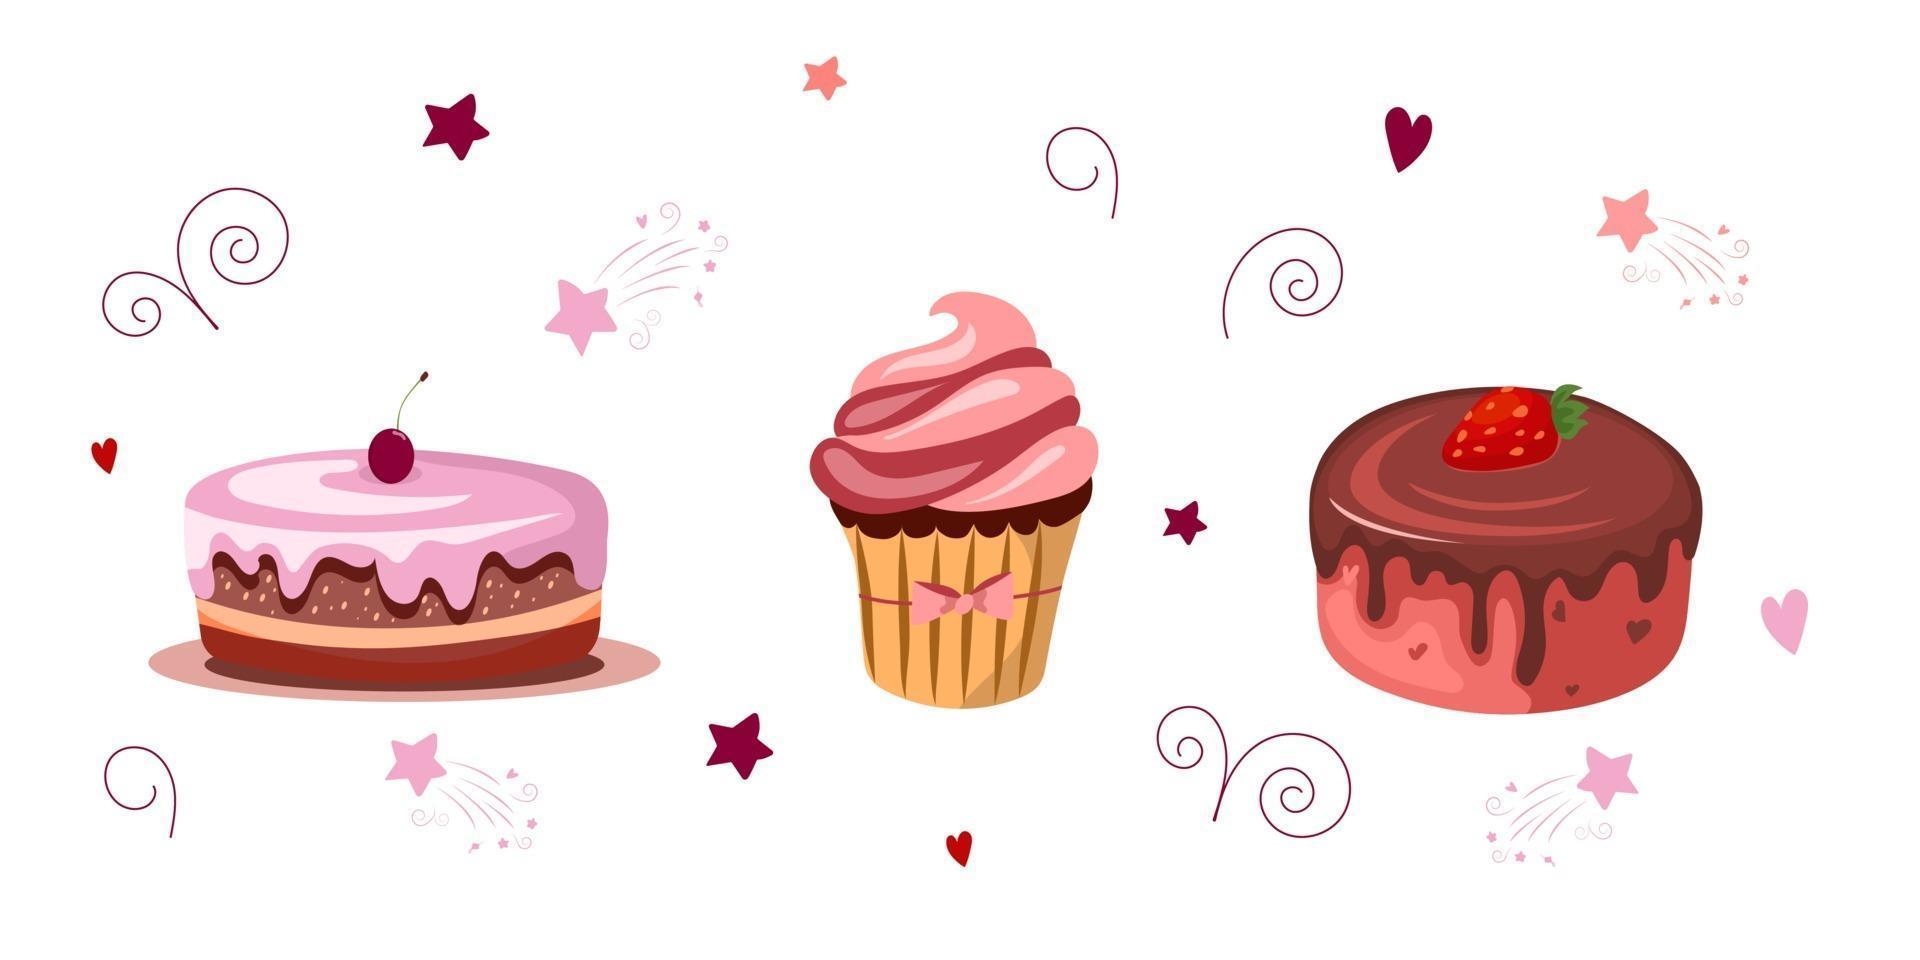 Set of sweet desserts. Cakes with chocolate, strawberries, cherries, cupcake. Vector illustration isolated on white background. Cartoon style